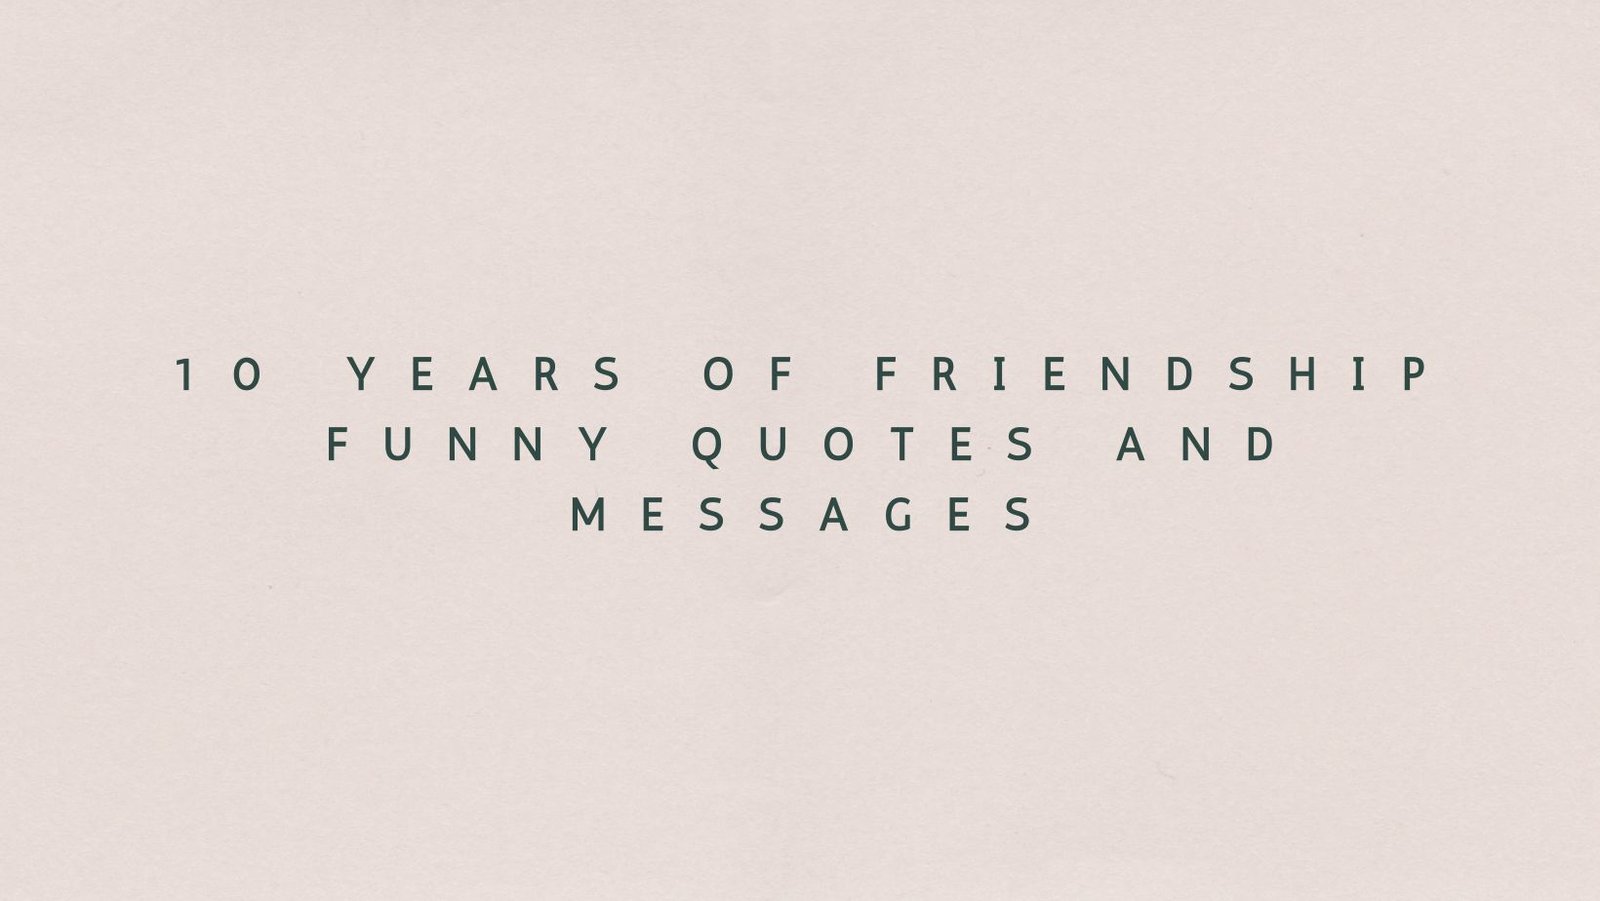 10 Years of Friendship Funny Quotes and Messages